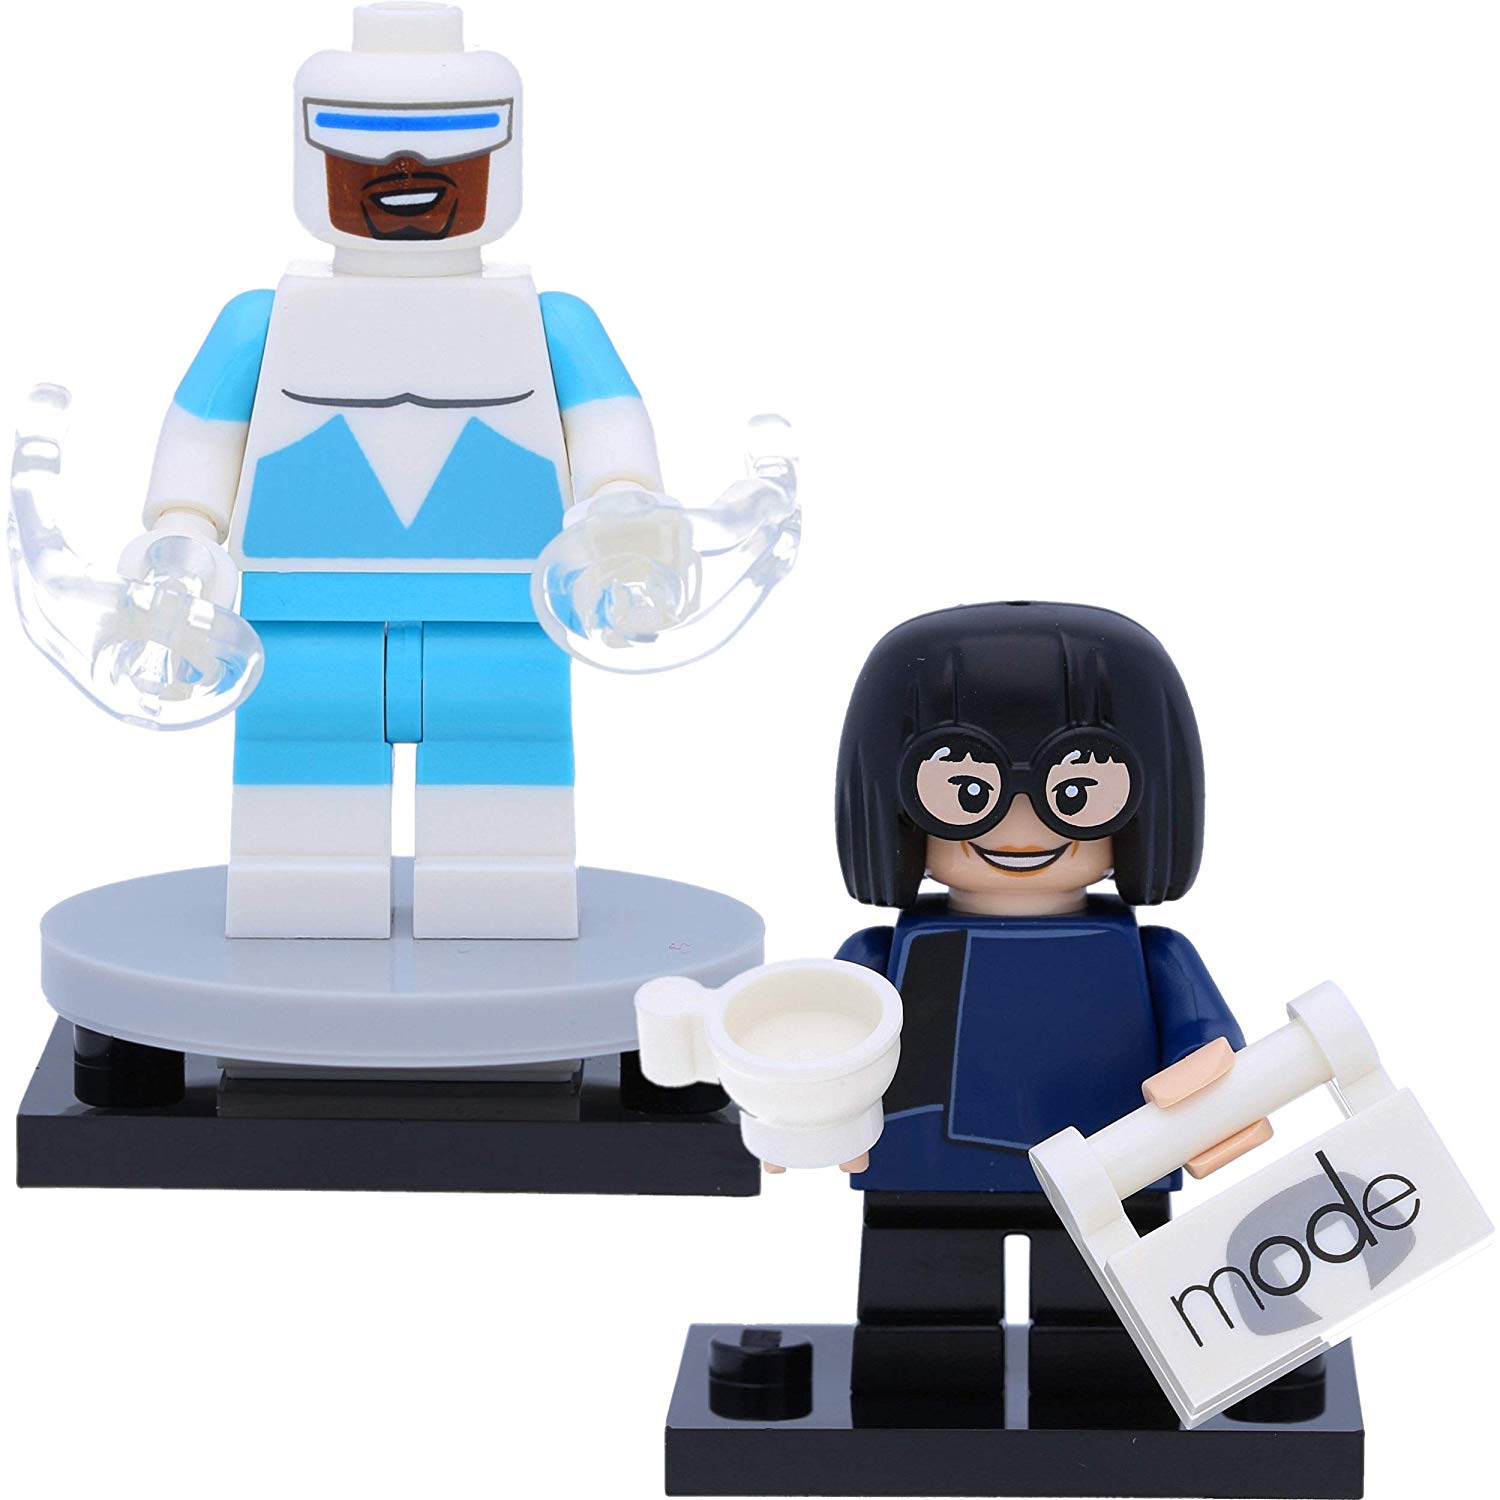 Lego 71024 Disney Series 2 Minifigures: #17 Edna Mode And #18 Frozone The I